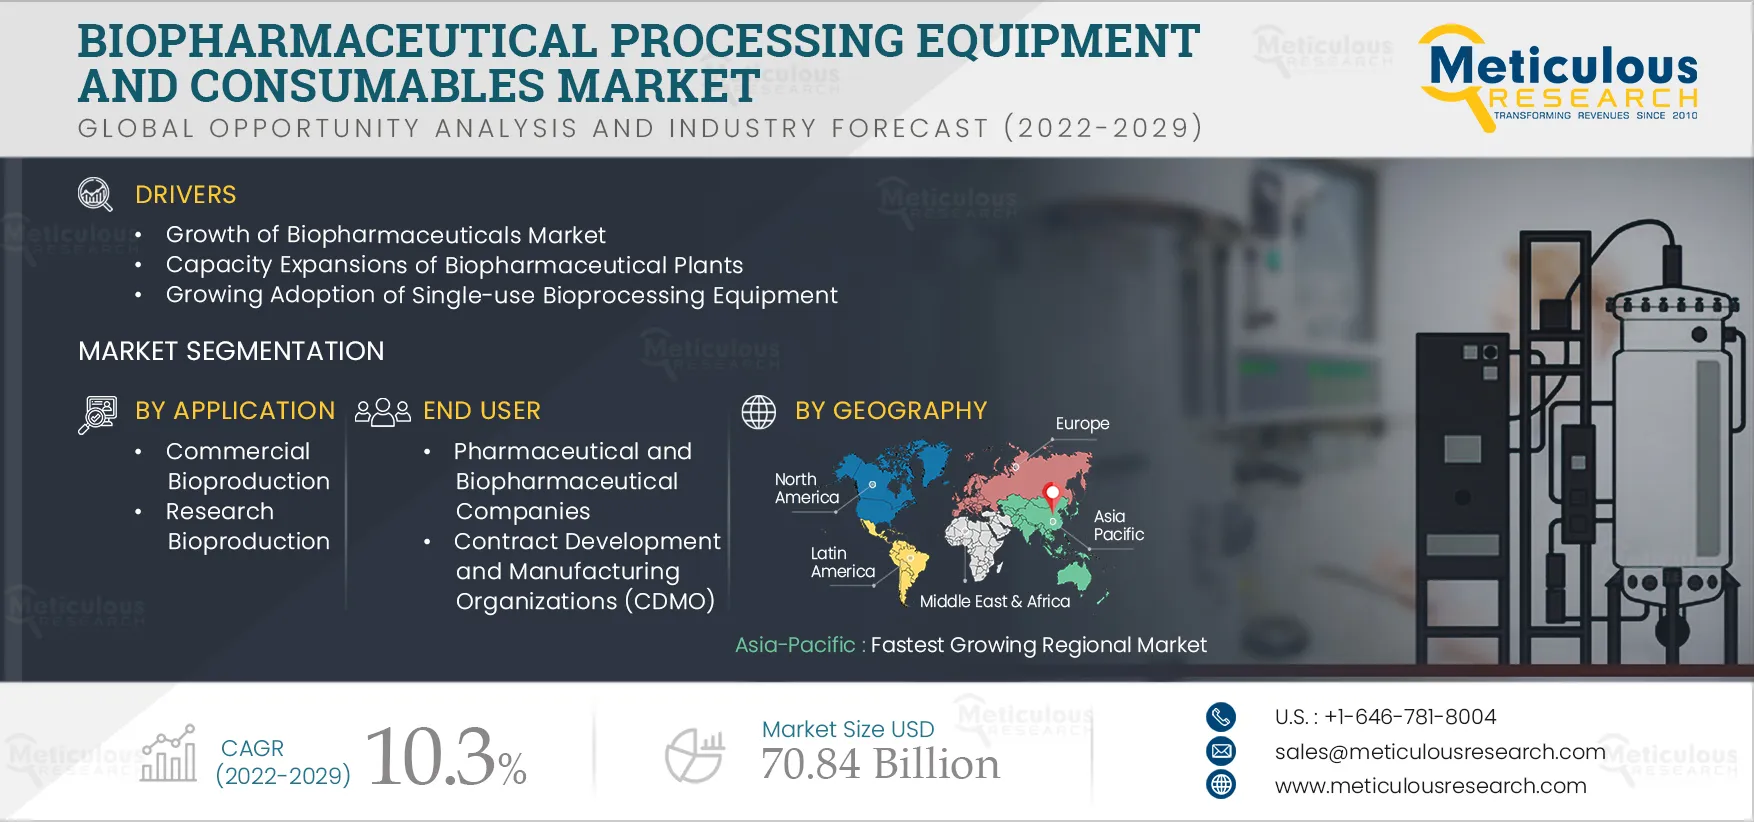 Biopharmaceutical Processing Equipment and Consumables Market